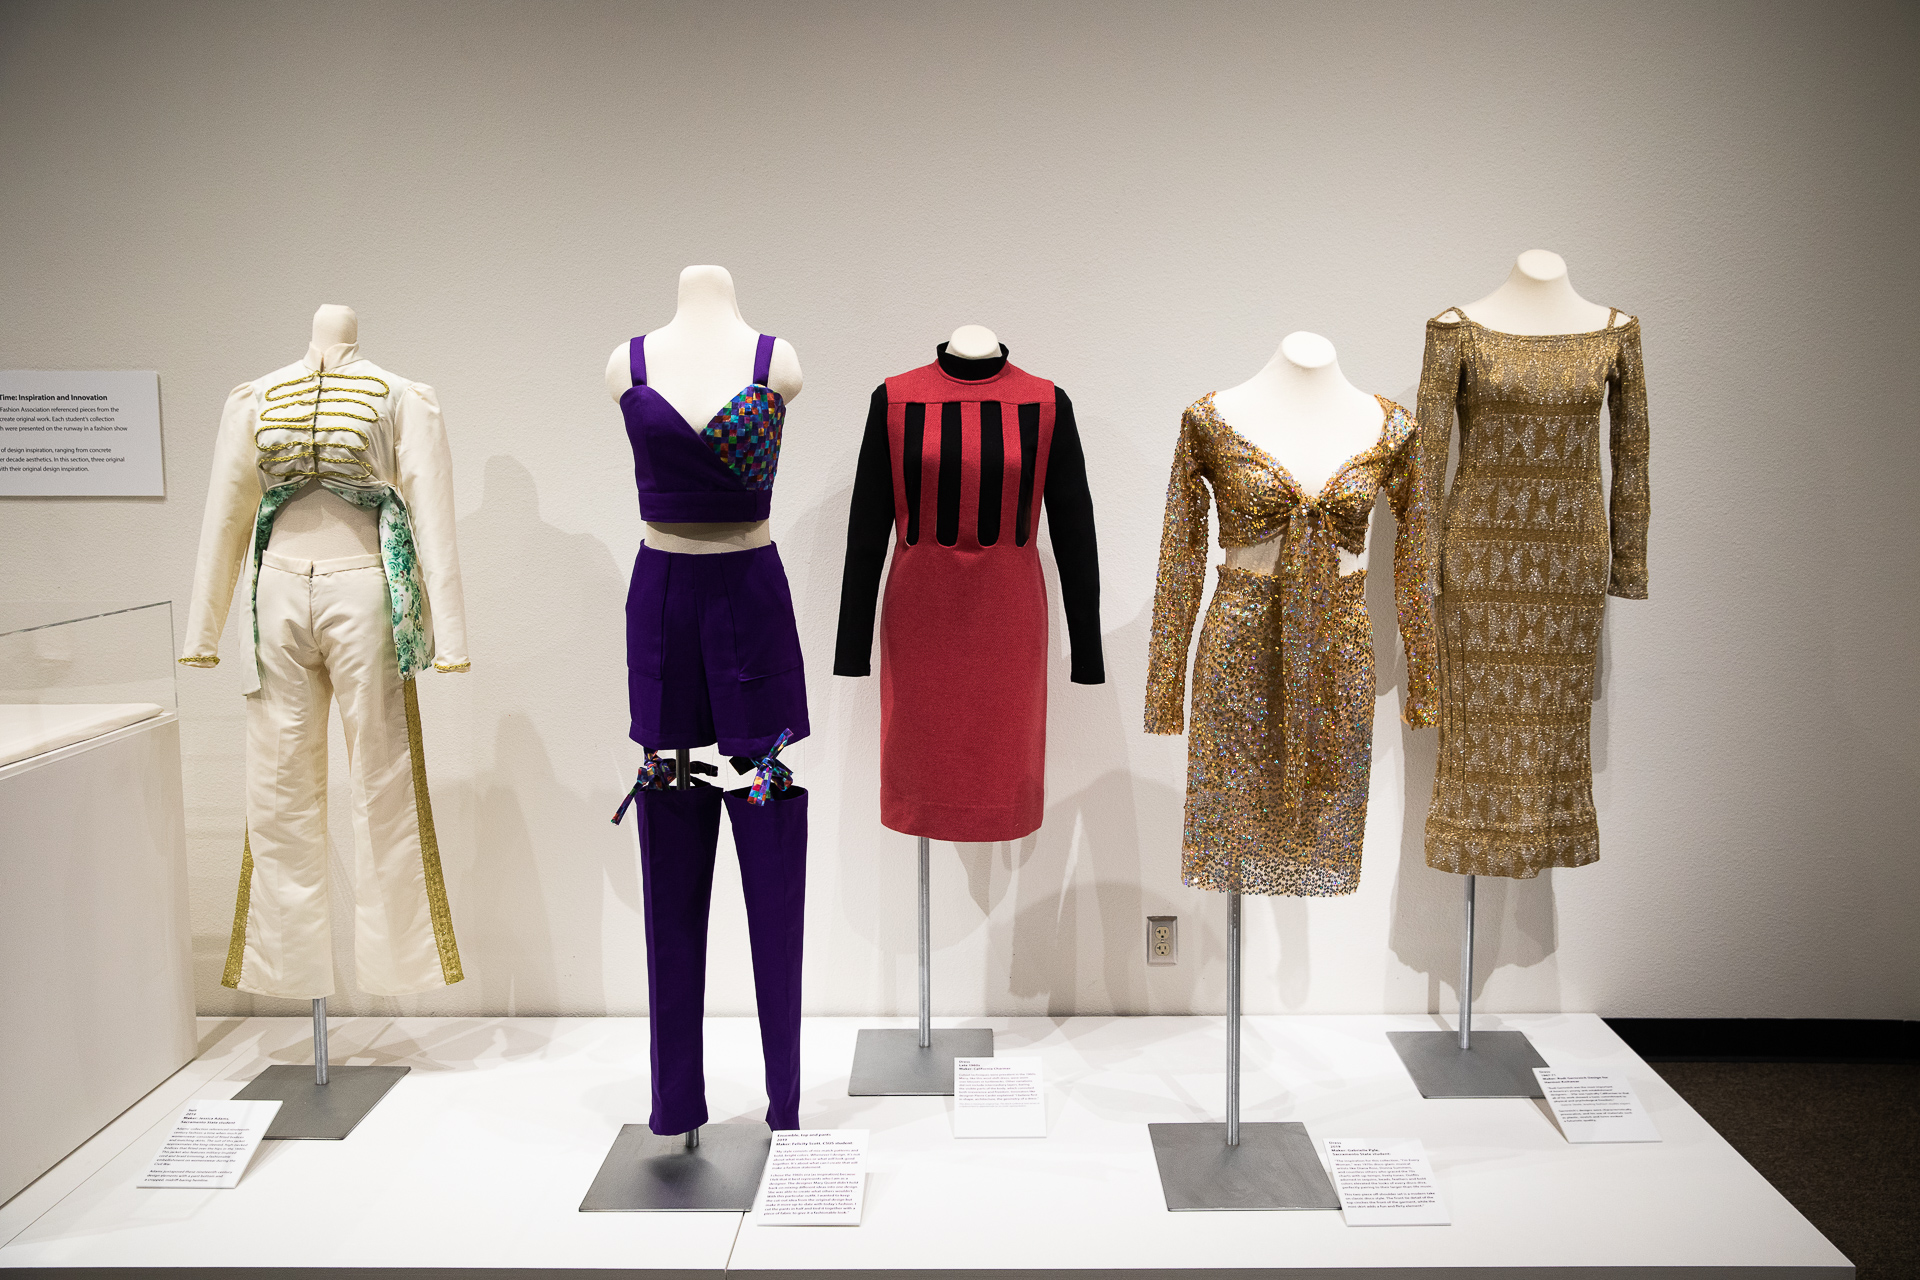 Five of the clothing outfits from eras between the 1860s and 1980s, on display as part of Sacramento State's 